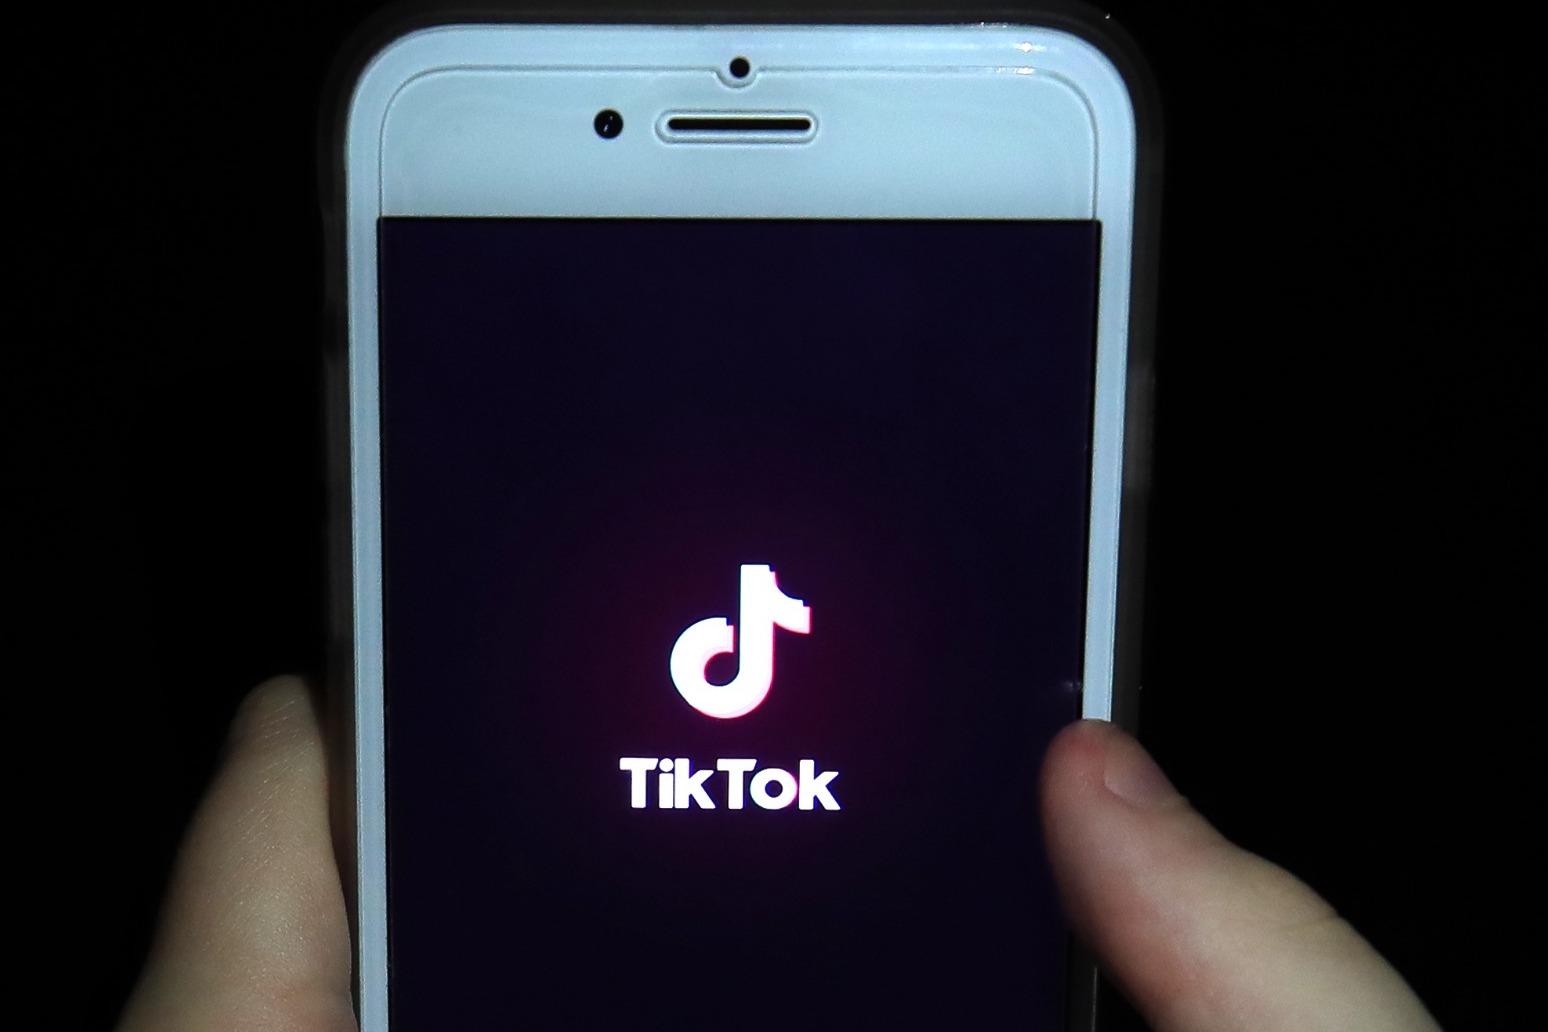 TikTok could face 27m fine for failing to protect childrens privacy